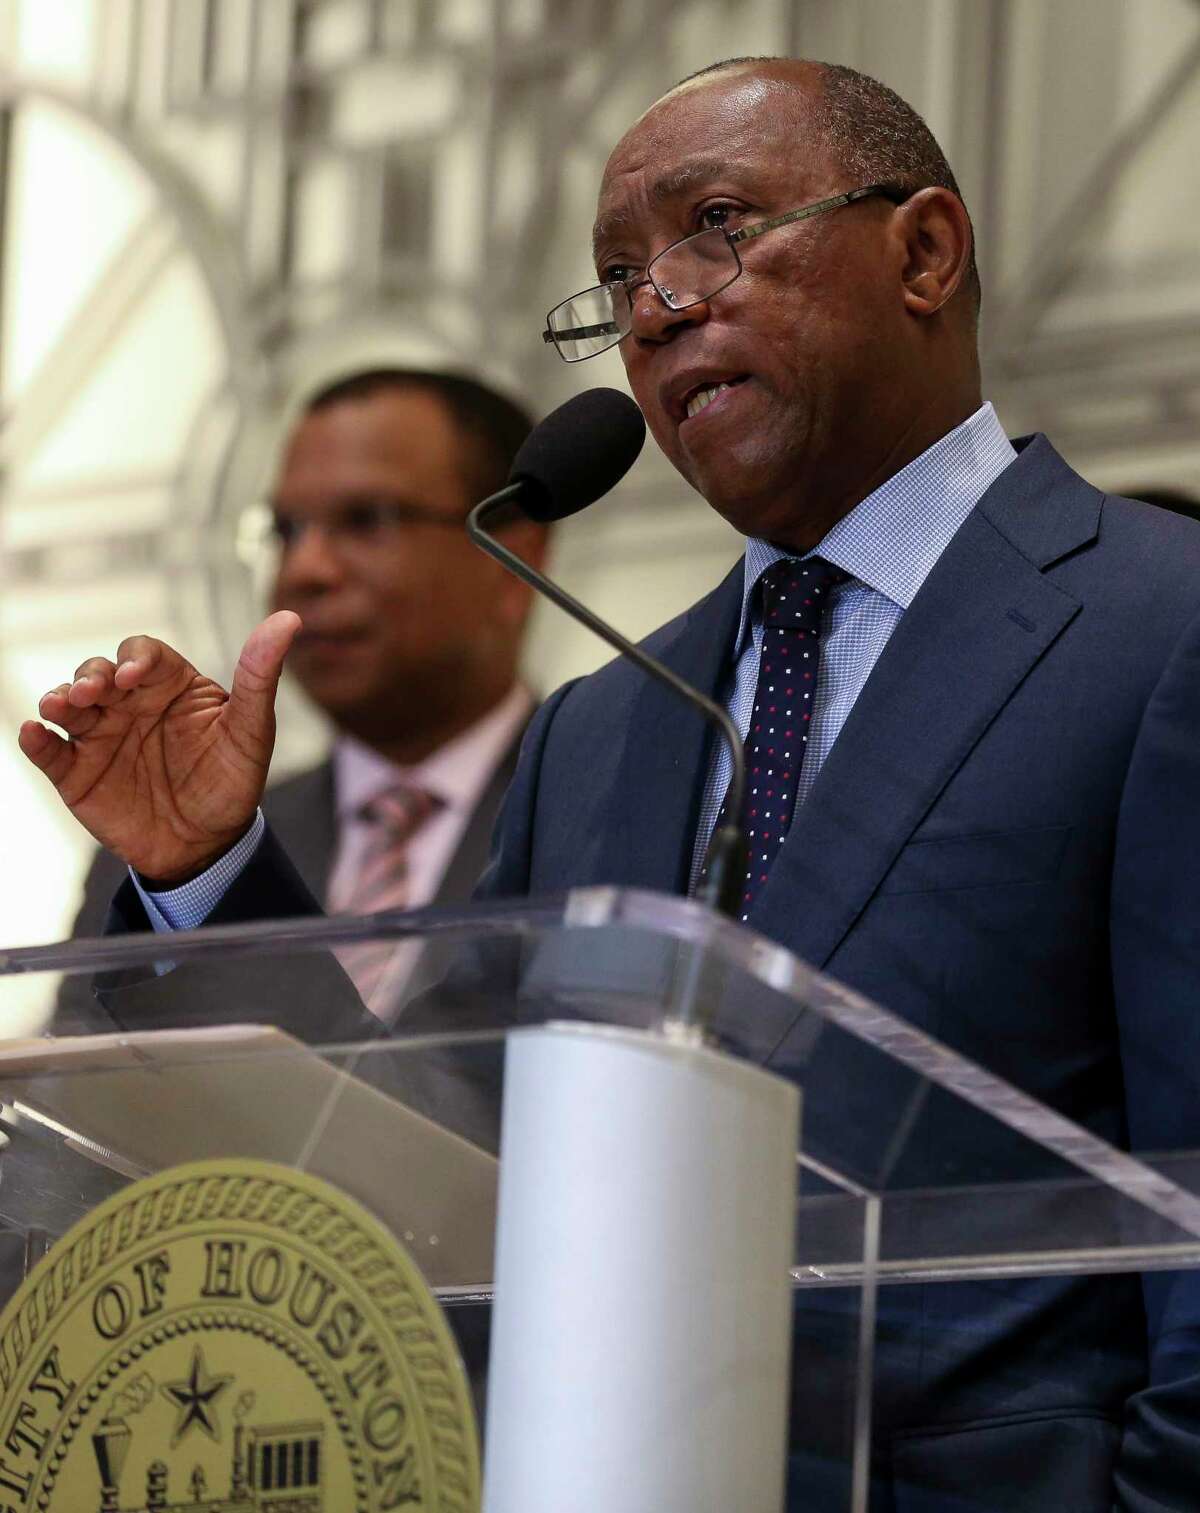 Mayor Sylvester Turner announces a proposed consent decree to improve the city's sanitary sewer system, during a press conference at City Hall.